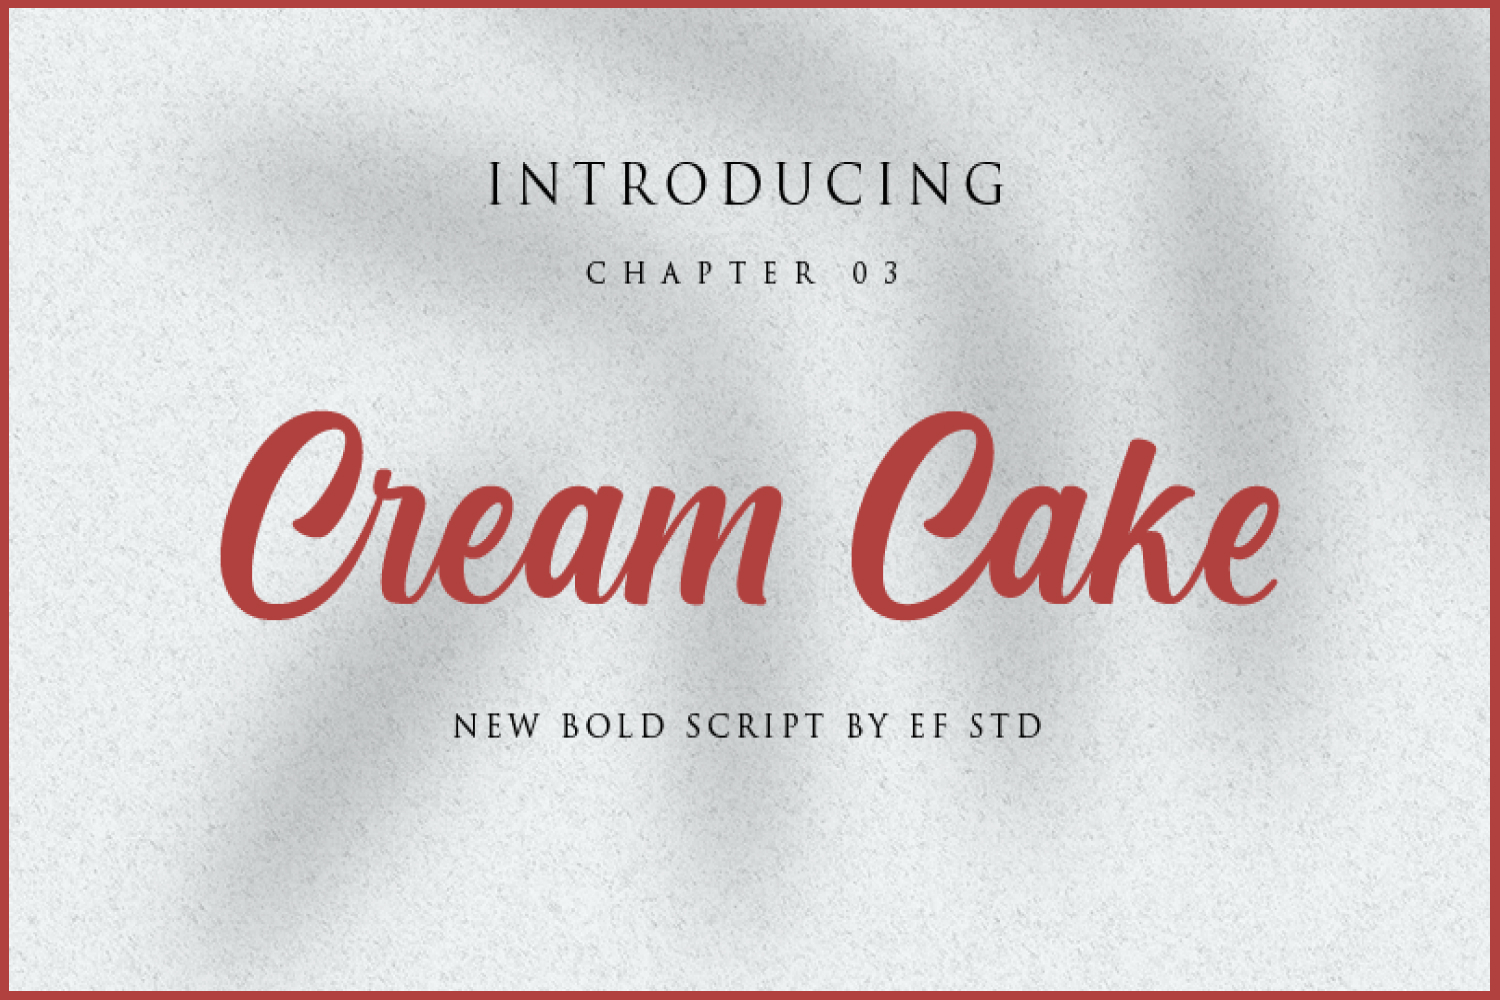 The inscription cream cake in red on a gray background.